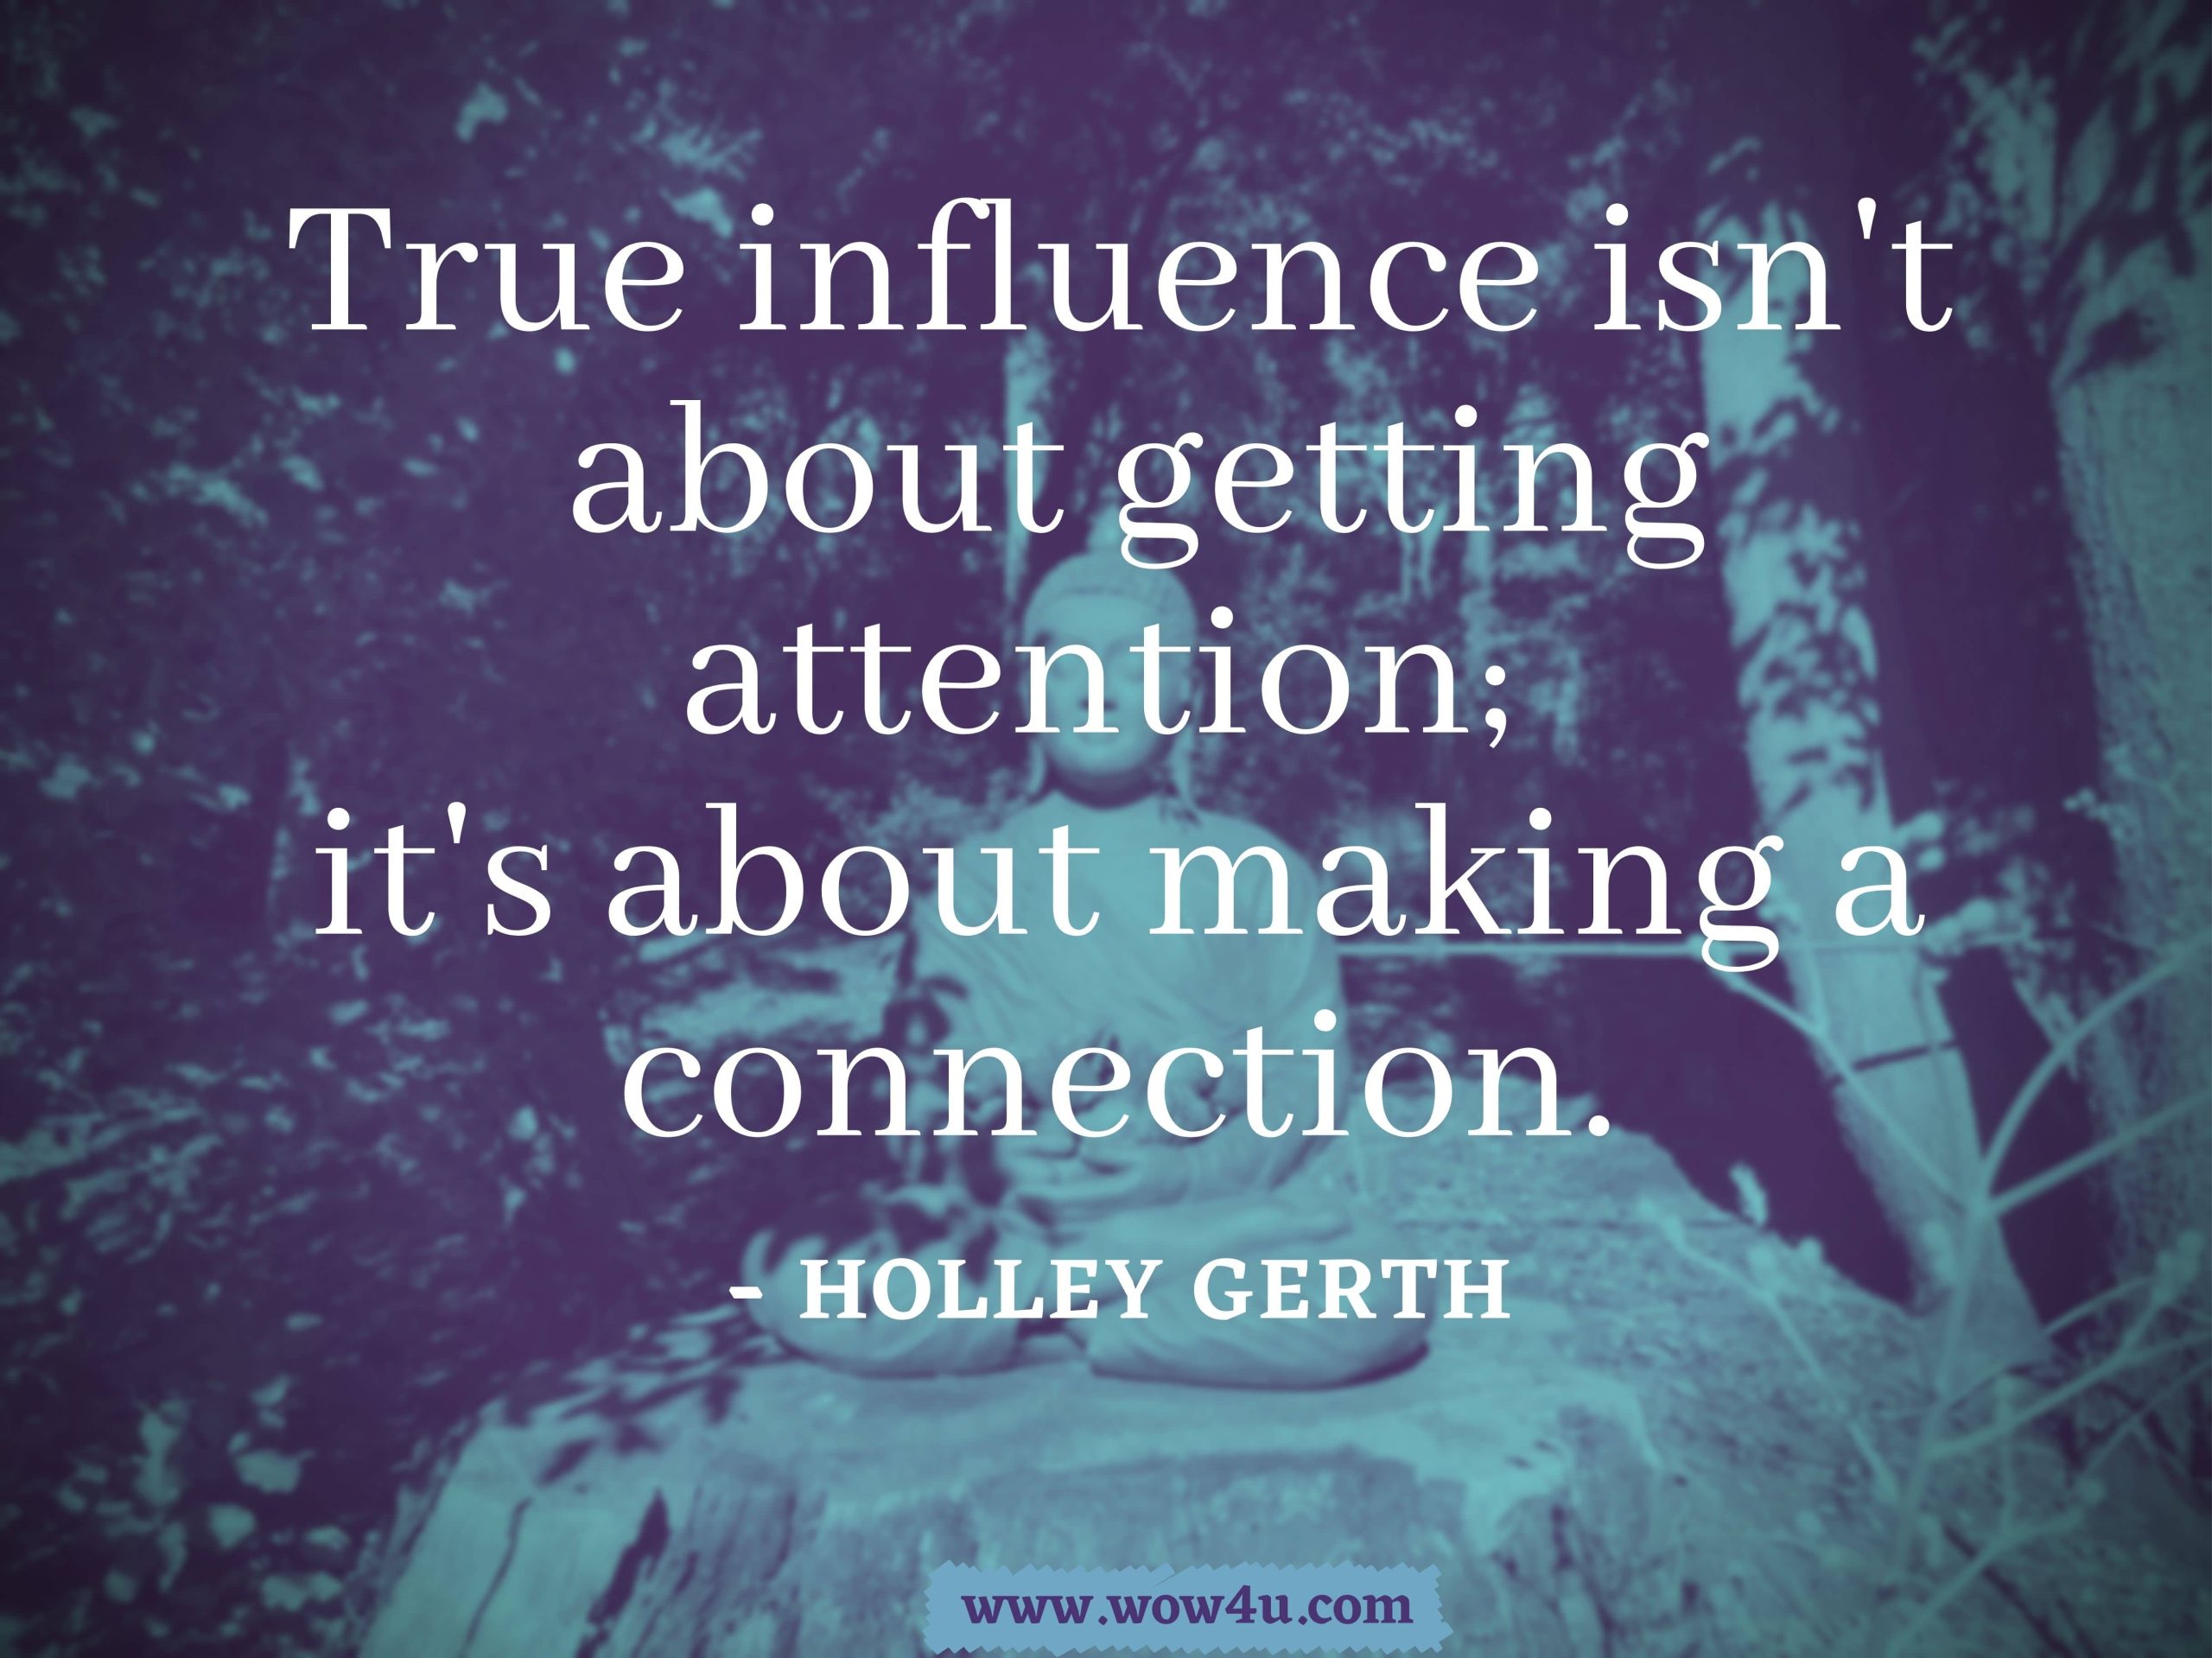 True influence isn't about getting attention; it's about making a connection. Holley Gerth, The Powerful Purpose of Introverts